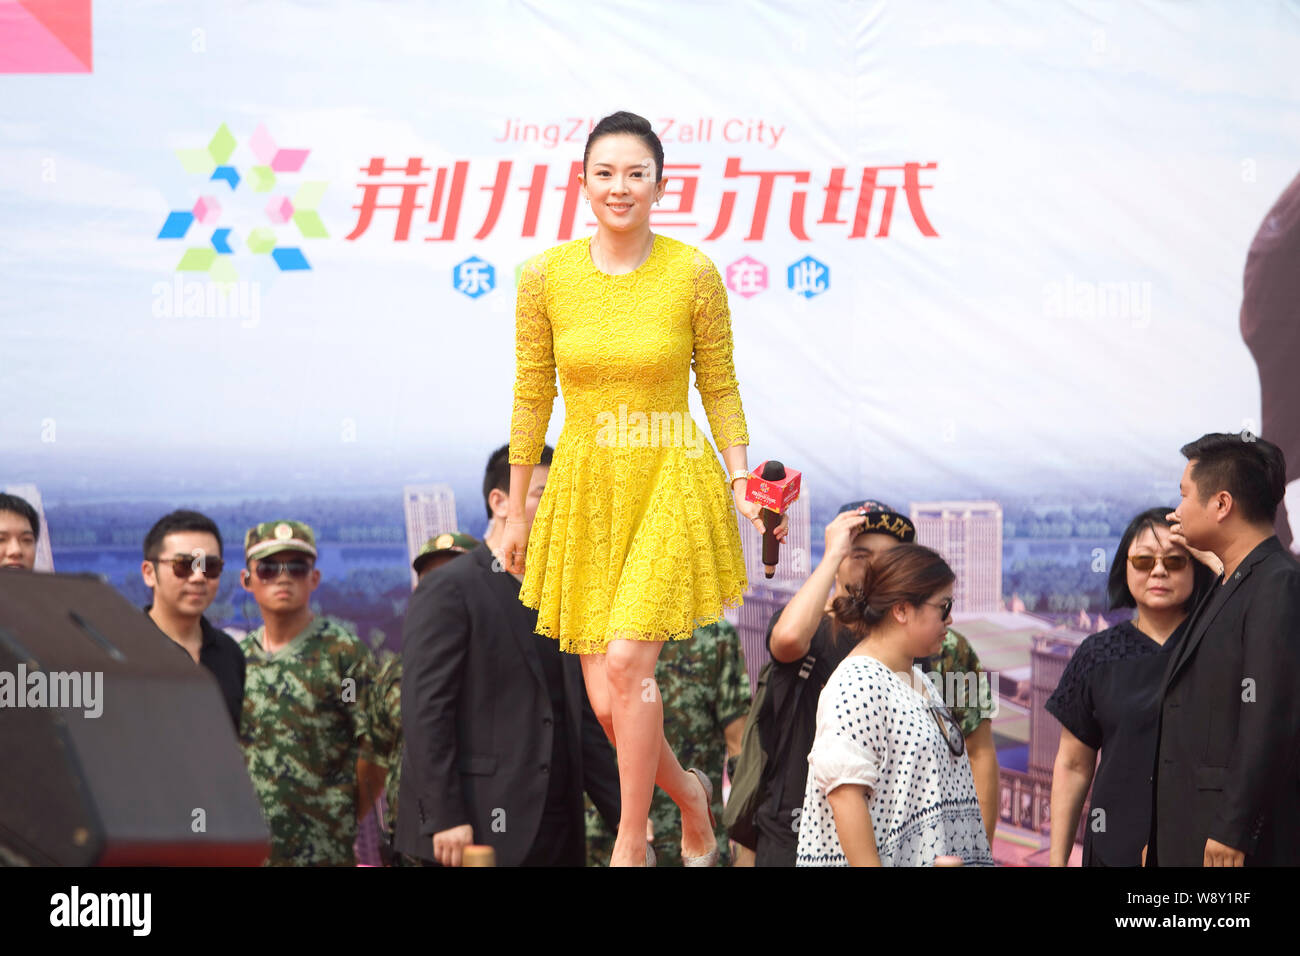 Chinese actress Zhang Ziyi, front, arrives at the opening ceremony for residential apartment project Jingzhou Zall City in Jingzhou city, central Chin Stock Photo